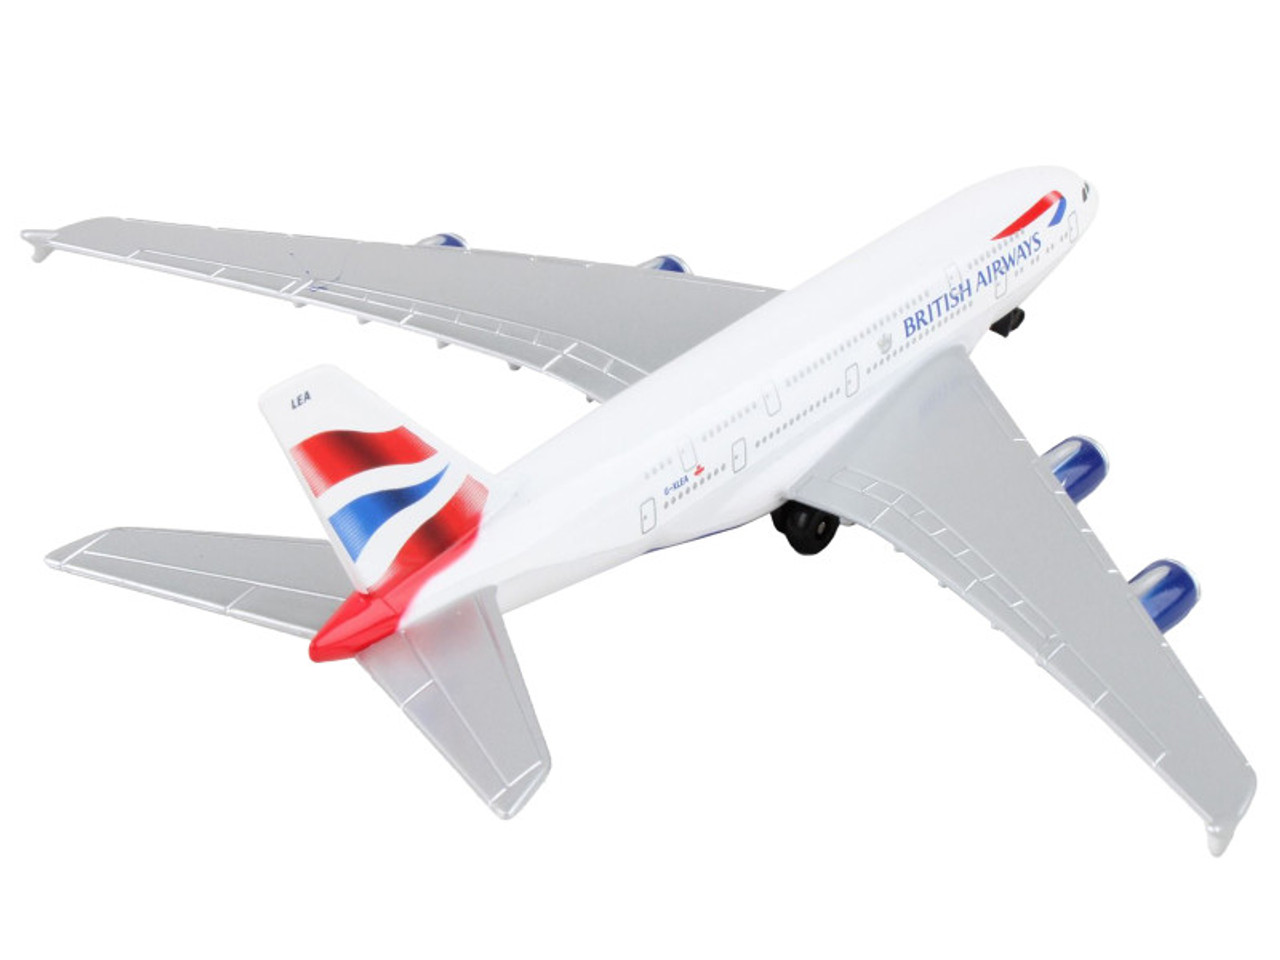 Airbus A380 Commercial Aircraft "British Airways" (G-XLEA) White with Blue and Red Tail Diecast Model Airplane by Daron